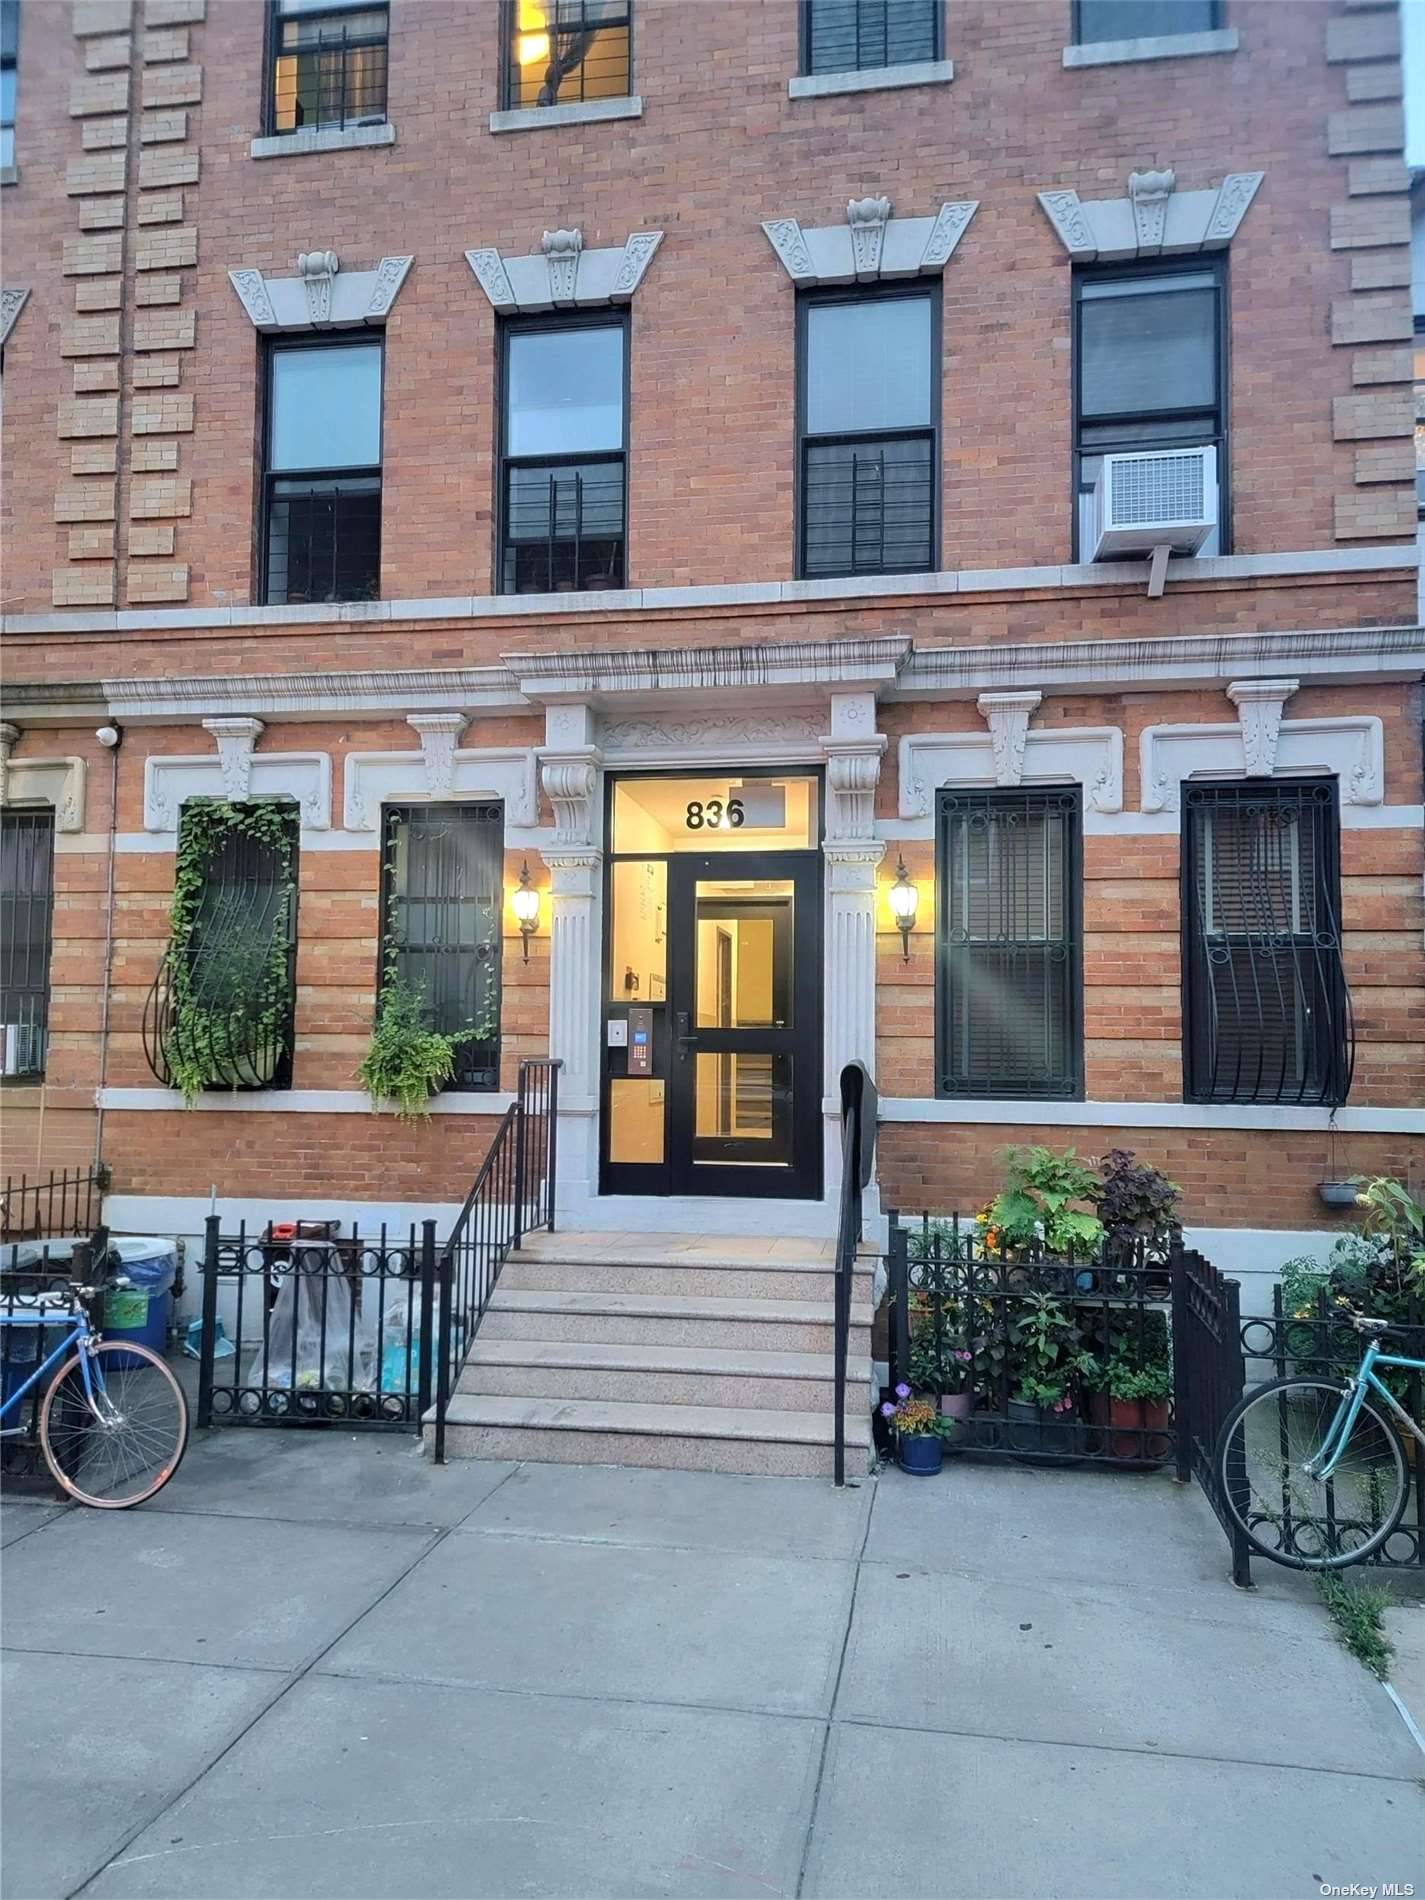 Welcome to 836 Jefferson Ave, your gateway to a charming 2 bedroom, 1 bathroom condo nestled in the heart of the thriving Bedstuy neighborhood in Brooklyn.